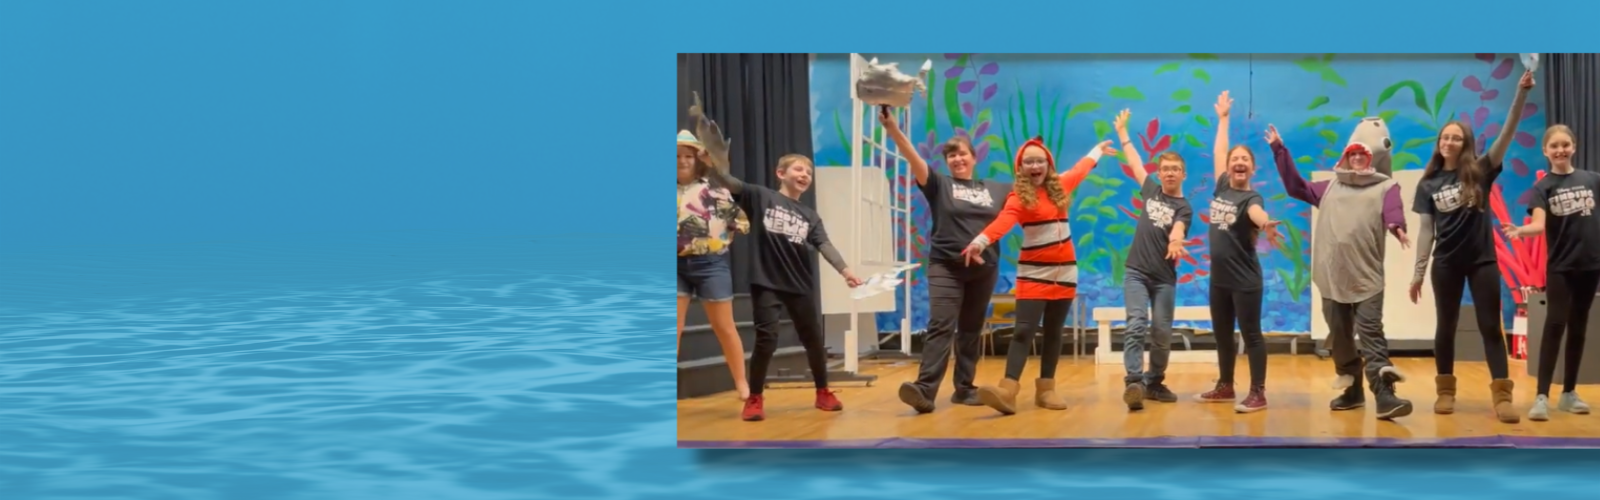 SWPS Students in Finding Nemo Play